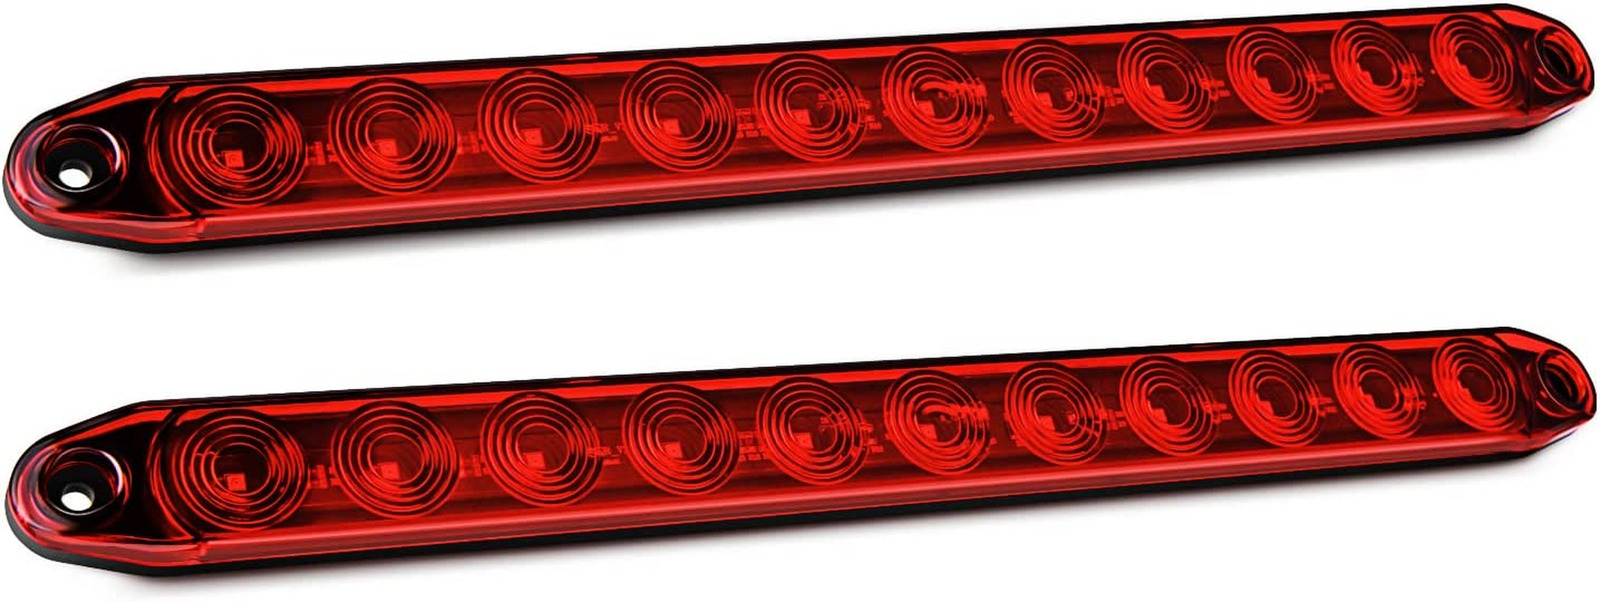 2PCS 16Inch 11 LED Red Trailer Light Bar for Park Stop Turn Signals Tail Brake L